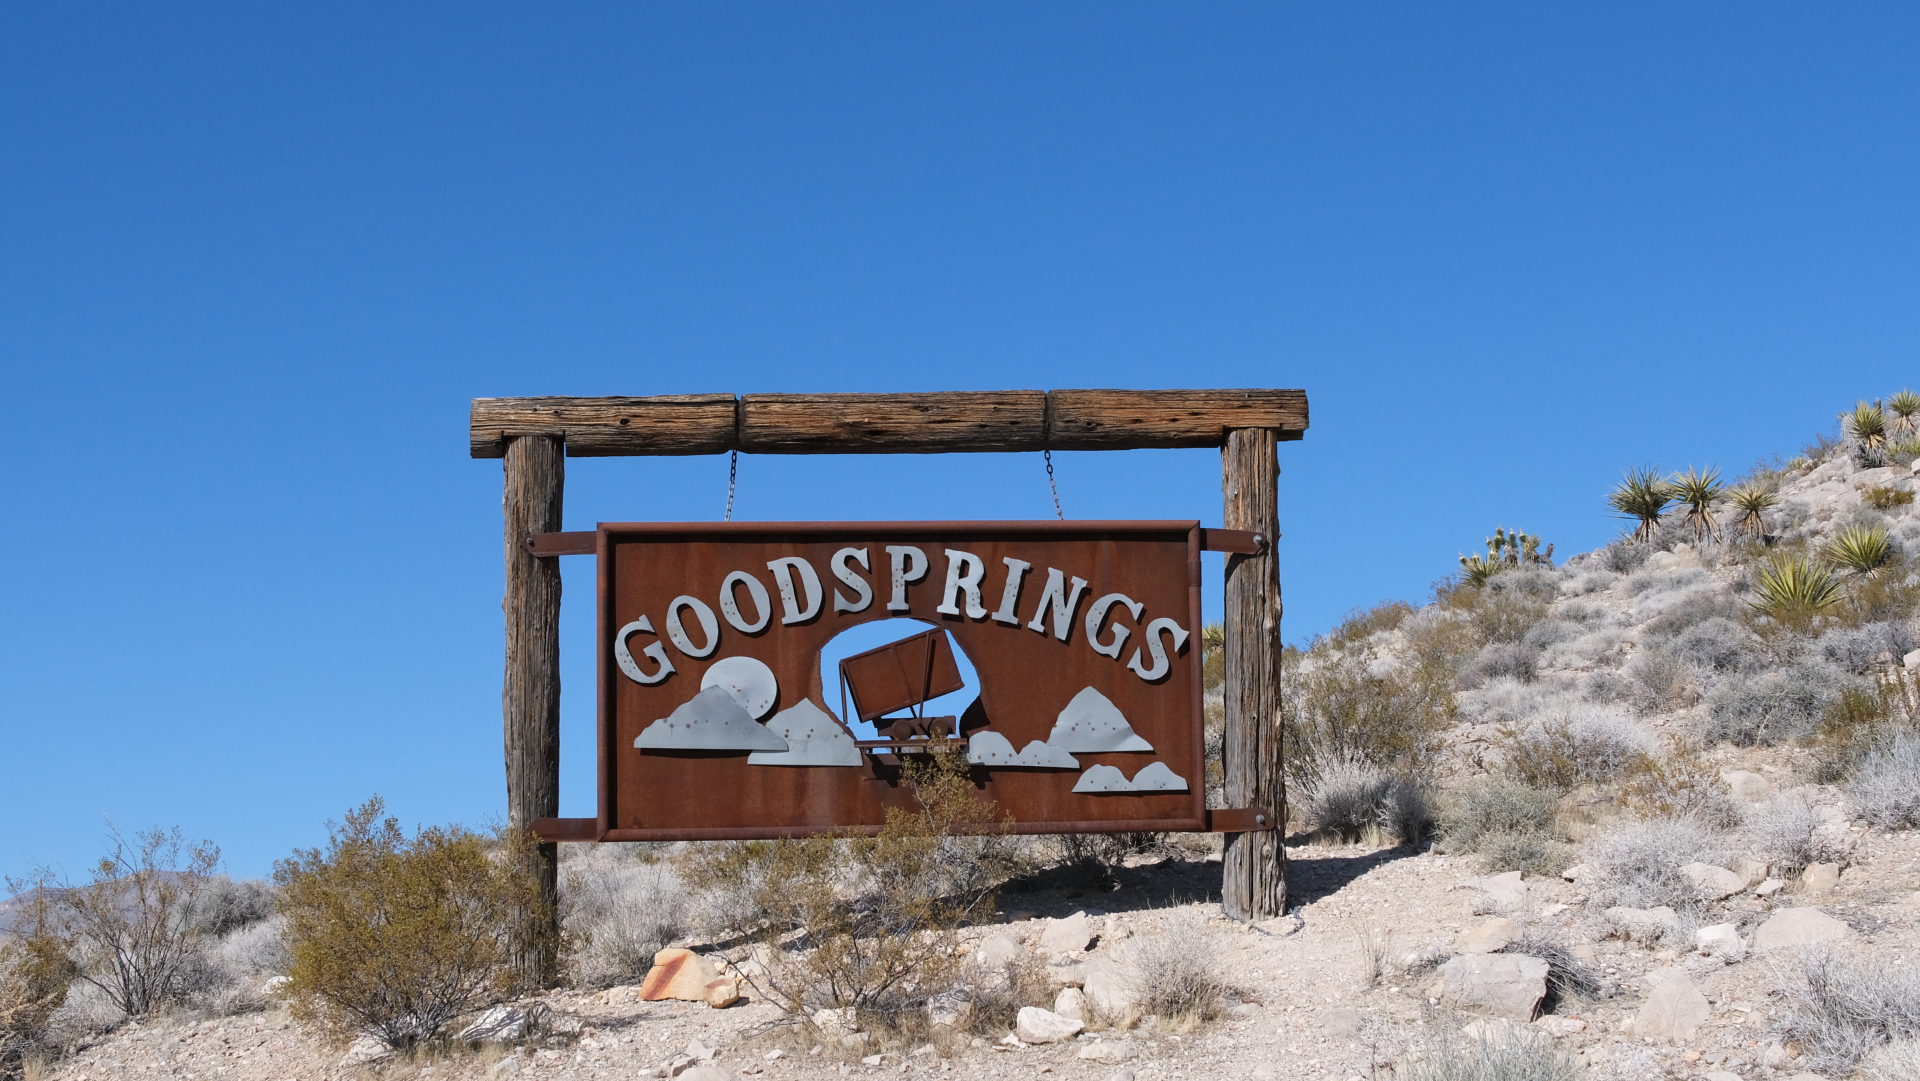 Near Las Vegas, Goodsprings involves historic buildings, dusty streets, and rugged desert surroundings, providing visitors a wooden 3D sign saying Goodsprings with cloudy mountain graphics